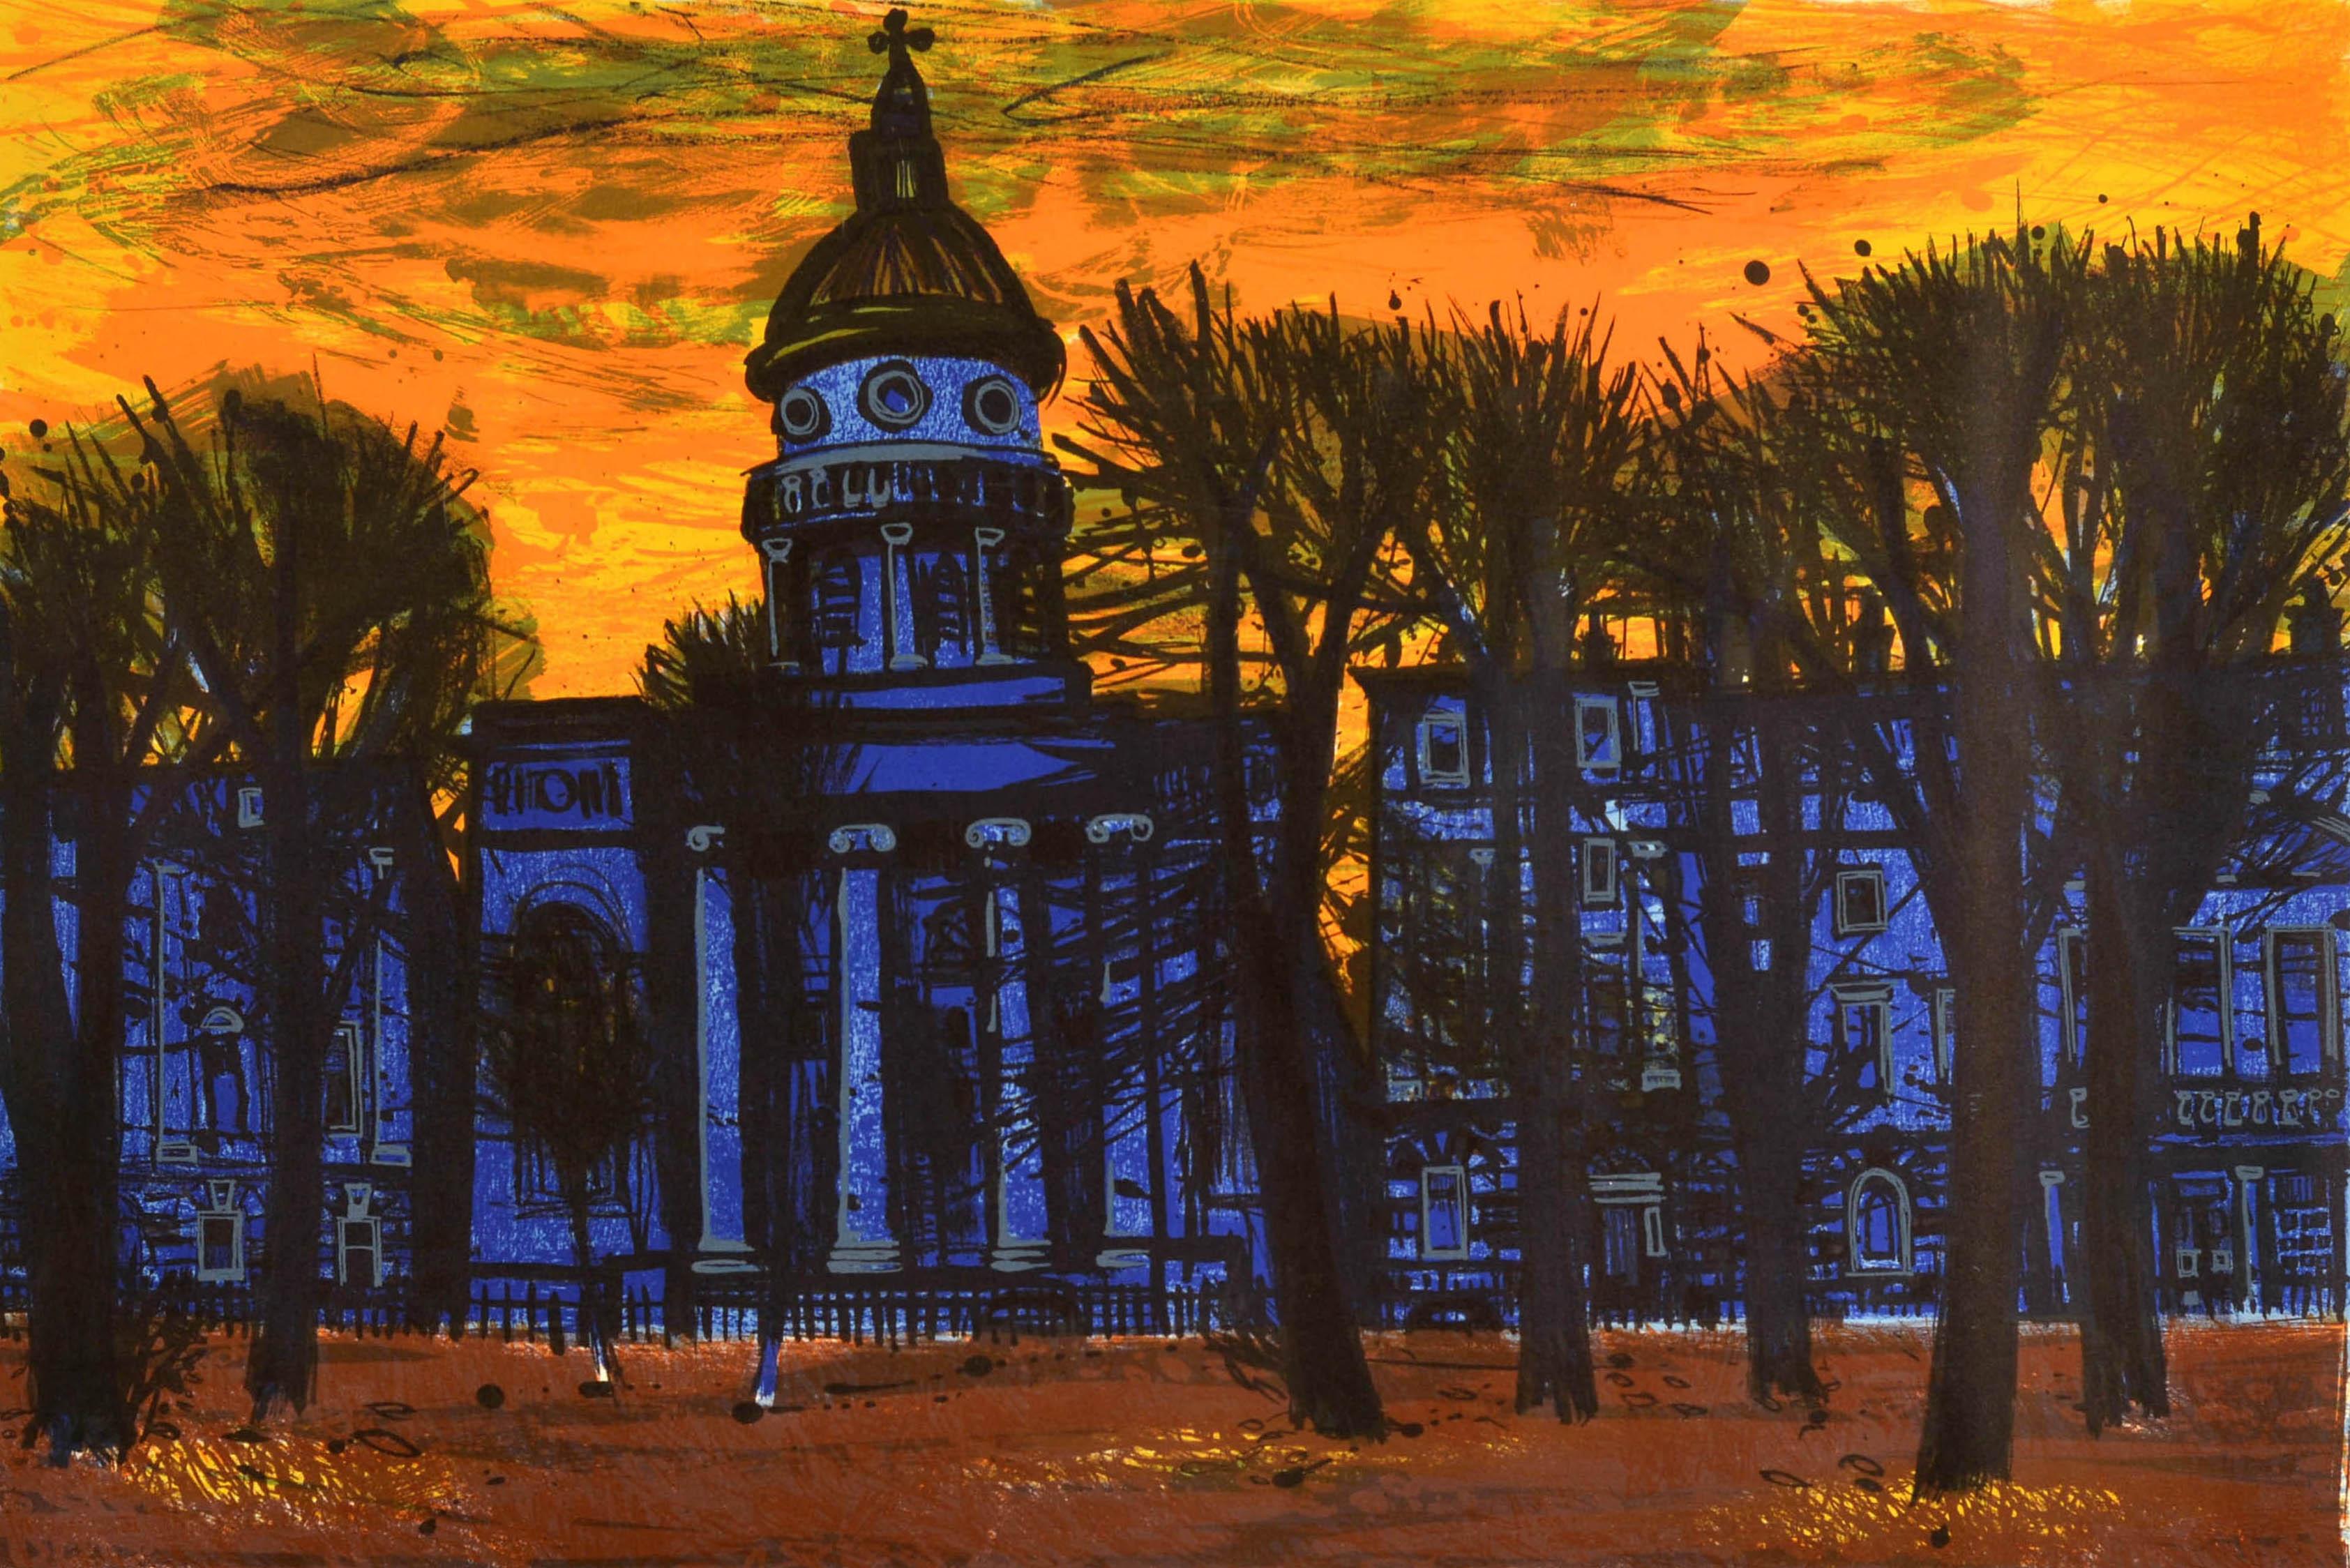 Original vintage post office advertising poster featuring a great artwork by a Scottish artist Margery Clinton (1931–2005) depicting a building behind the trees with yellow and orange skies above, the caption below the image reads - Correct Address: